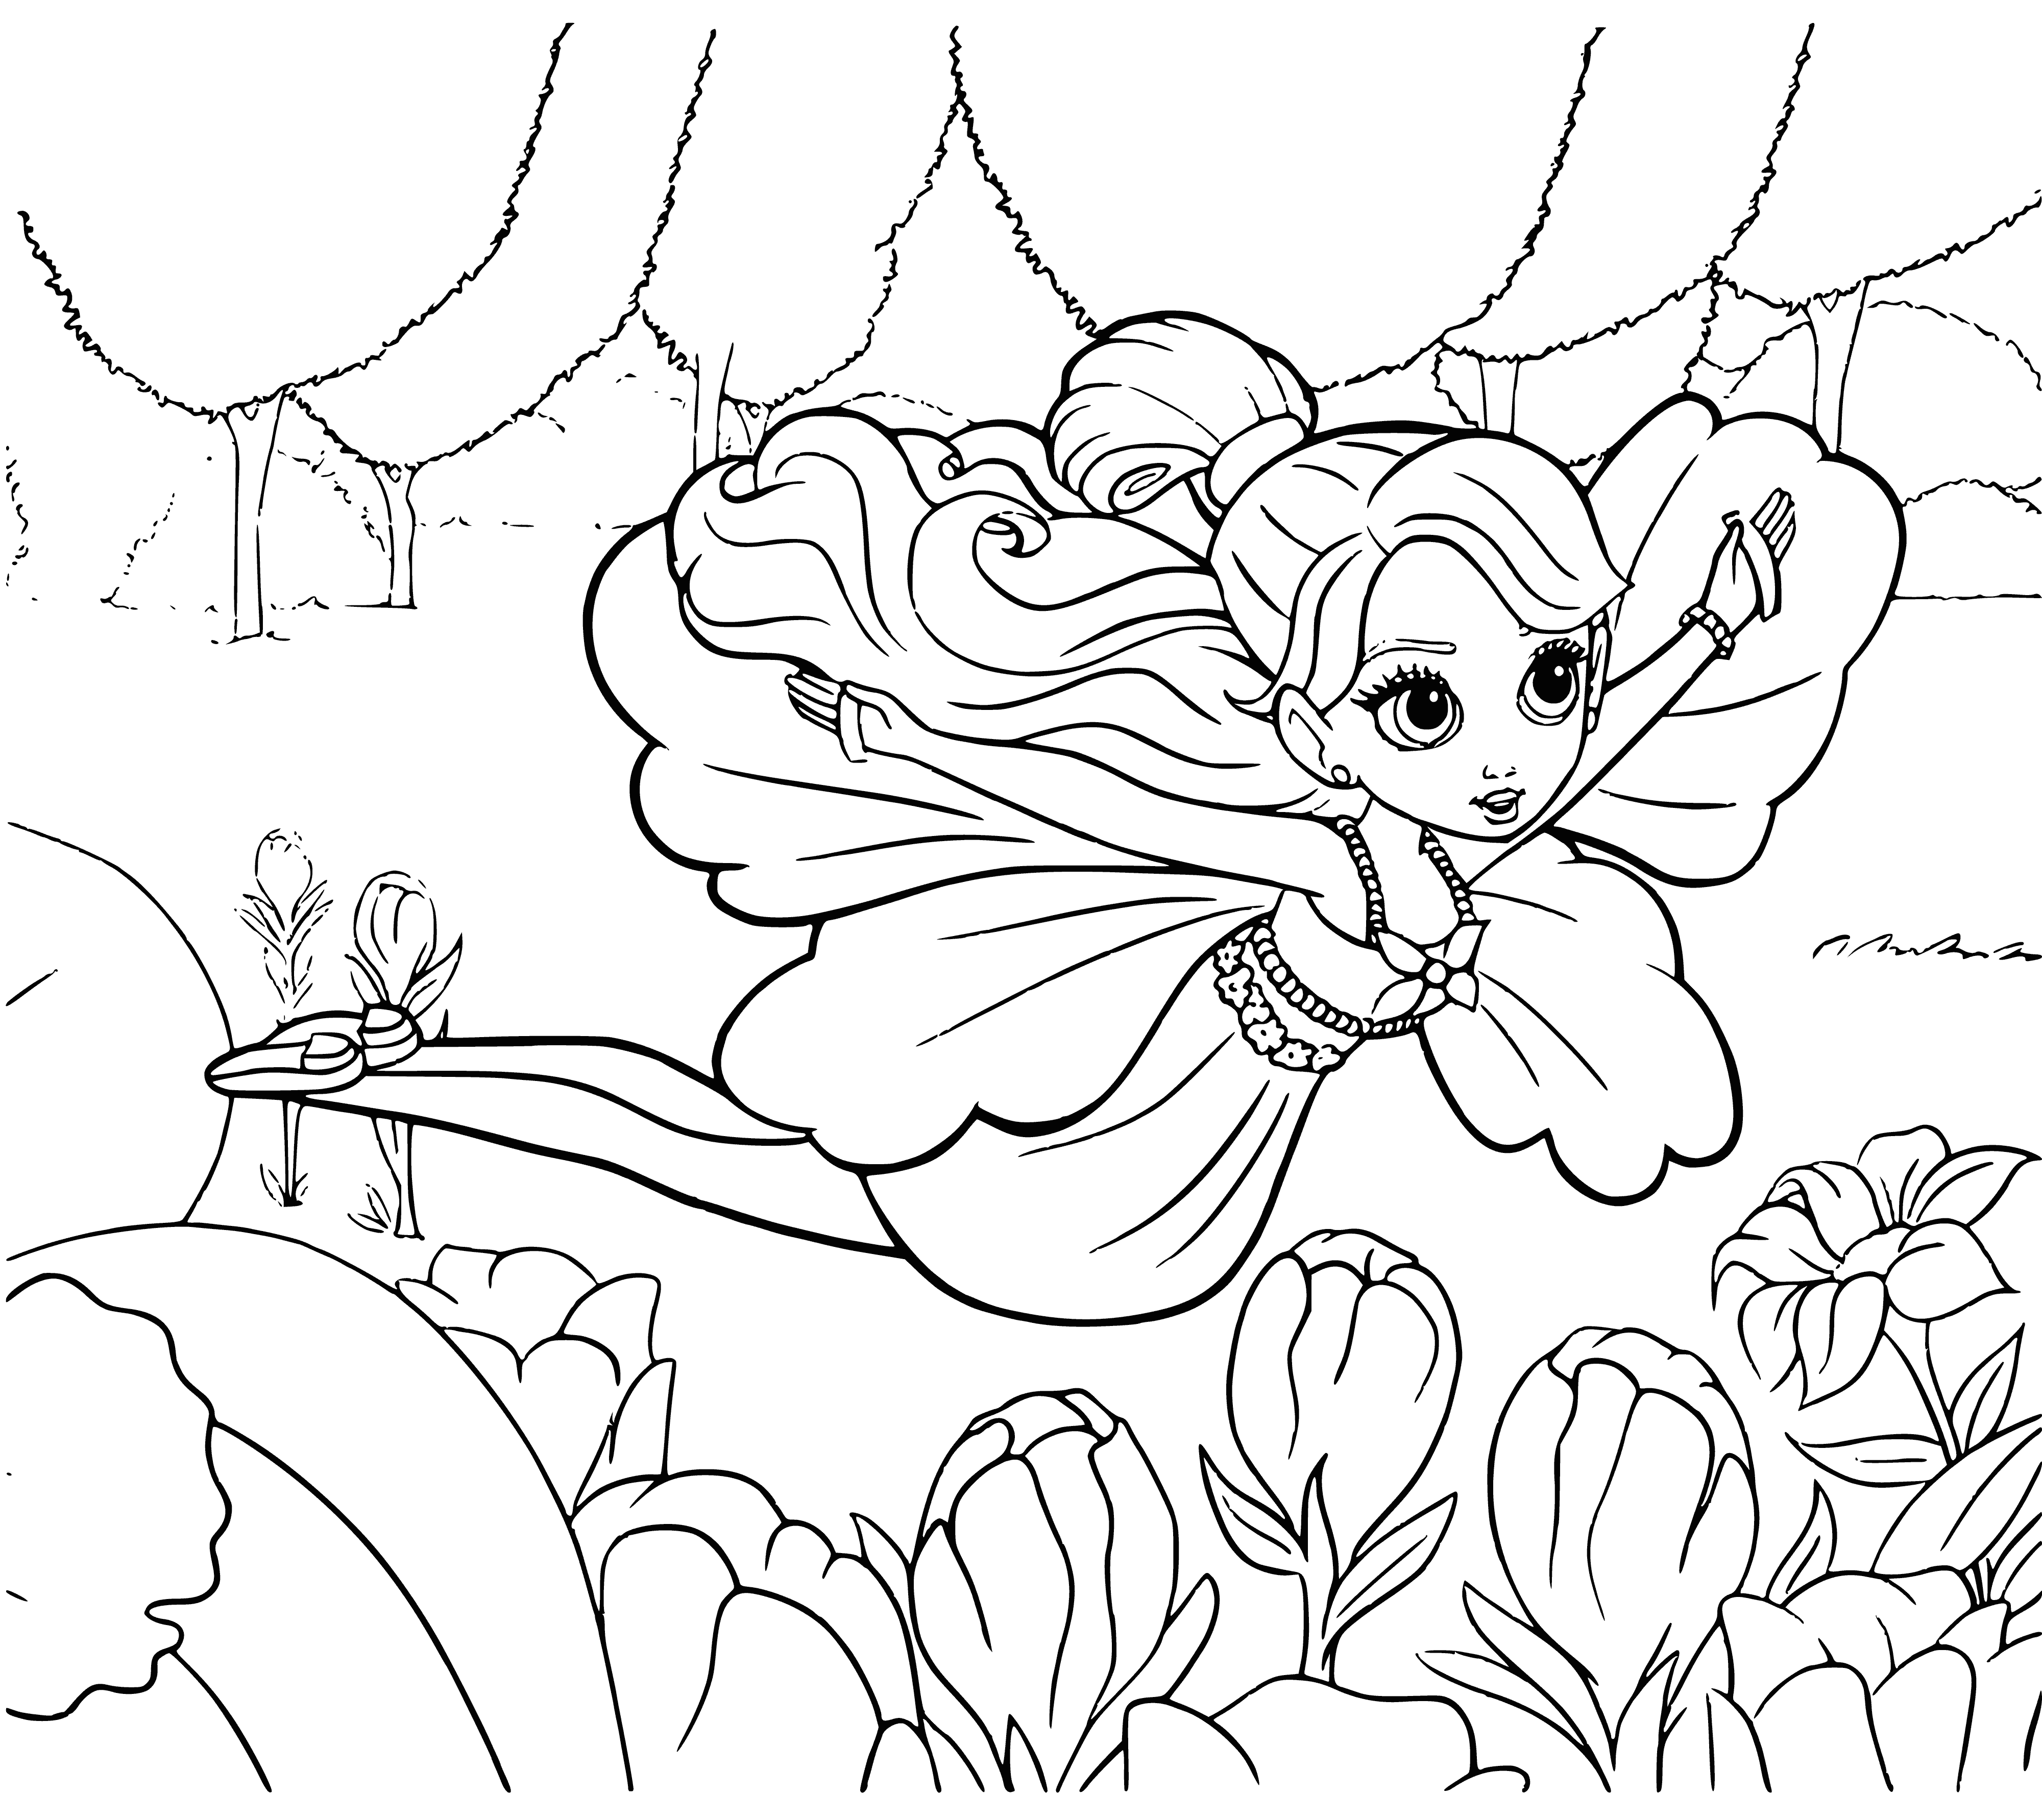 coloring page: A blue fairy with long blonde hair and a purple dress playfully flits through the air with her translucent wings.